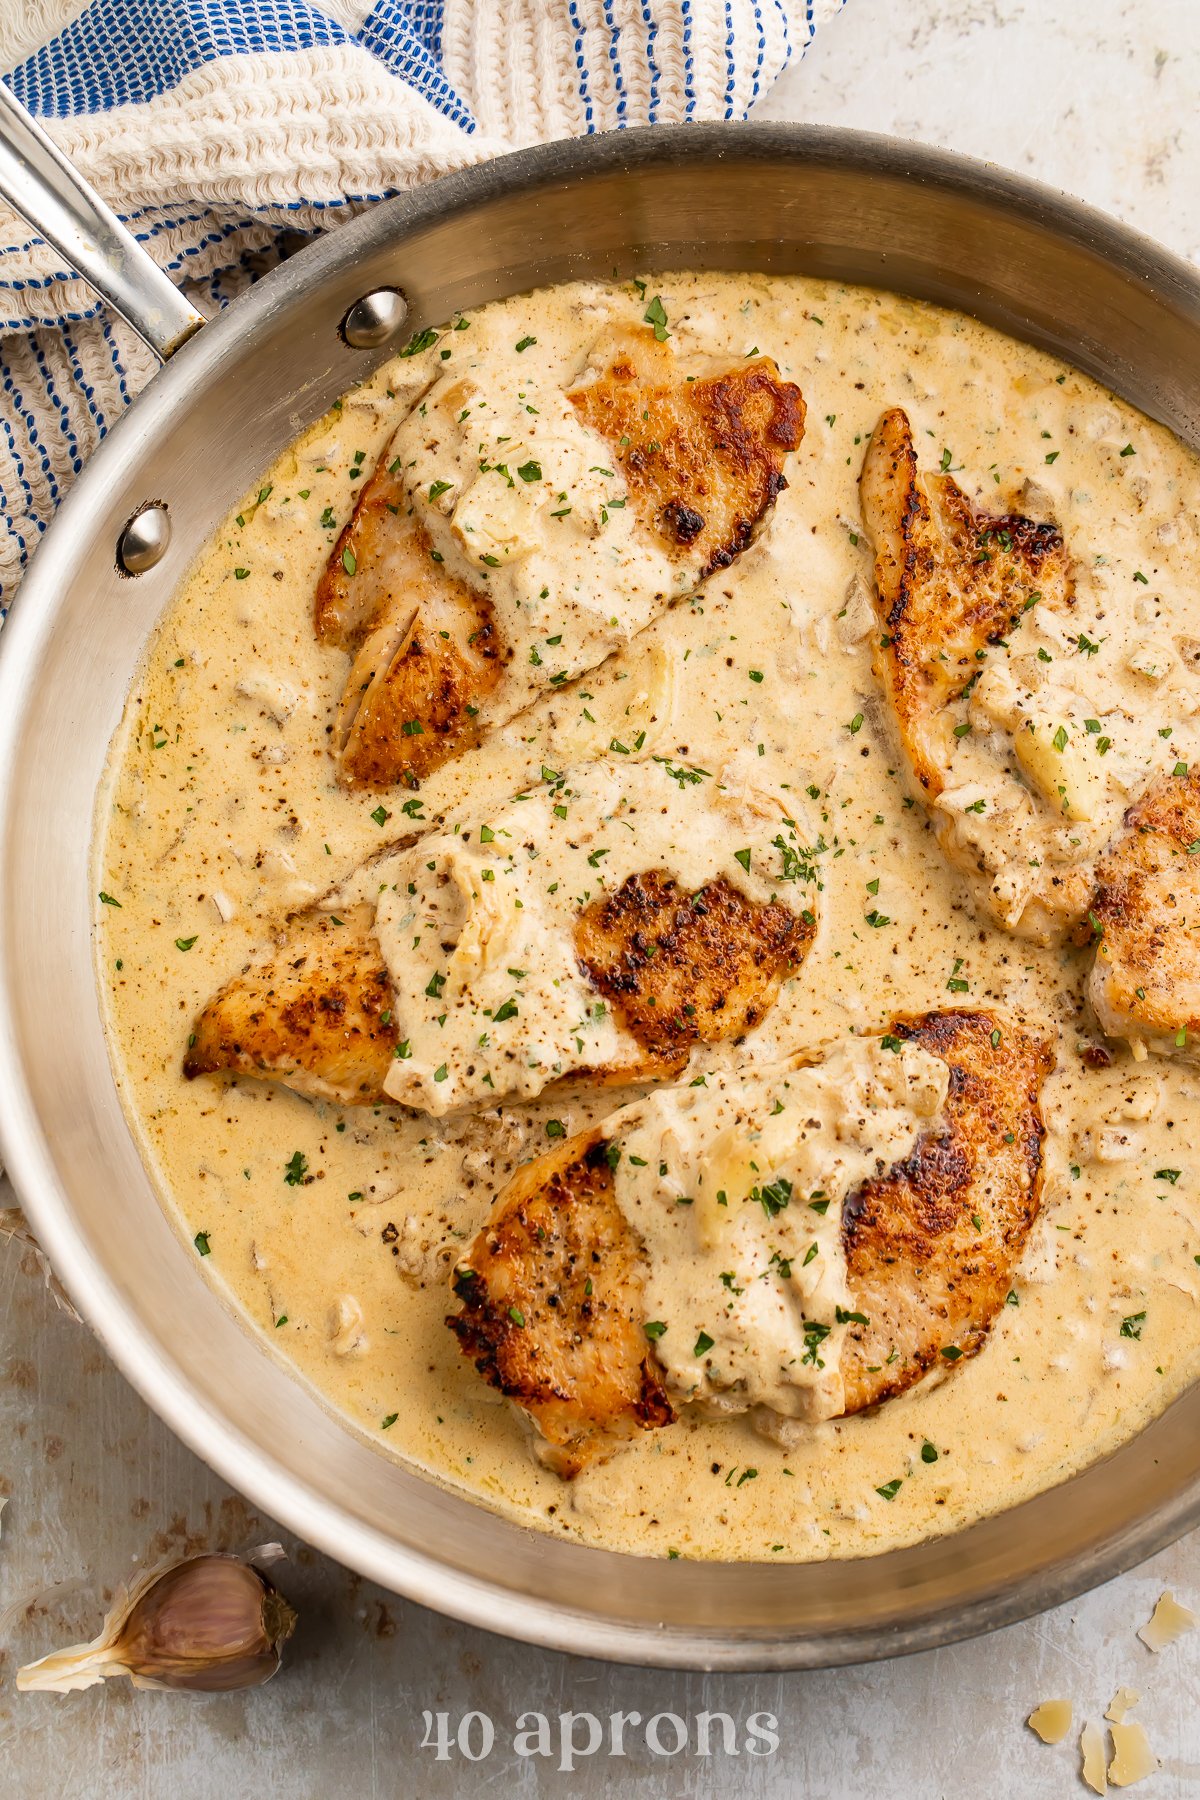 Overhead view of 4 chicken breasts in a creamy garlic sauce in a large silver skillet.